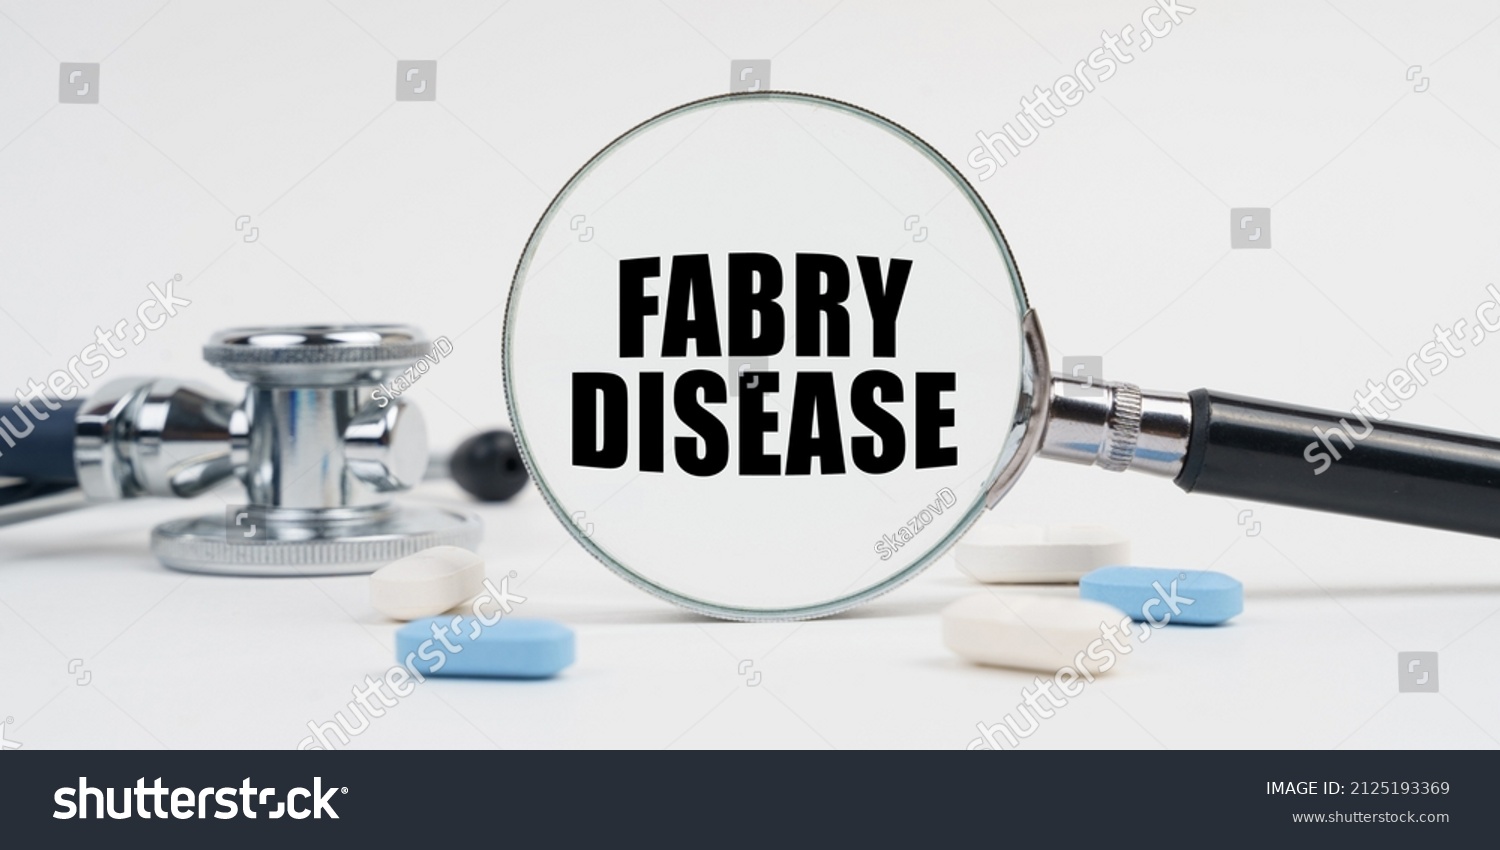 Medicine and health concept. On a white surface lie pills, a stethoscope and a magnifying glass with the inscription - FABRY DISEASE #2125193369